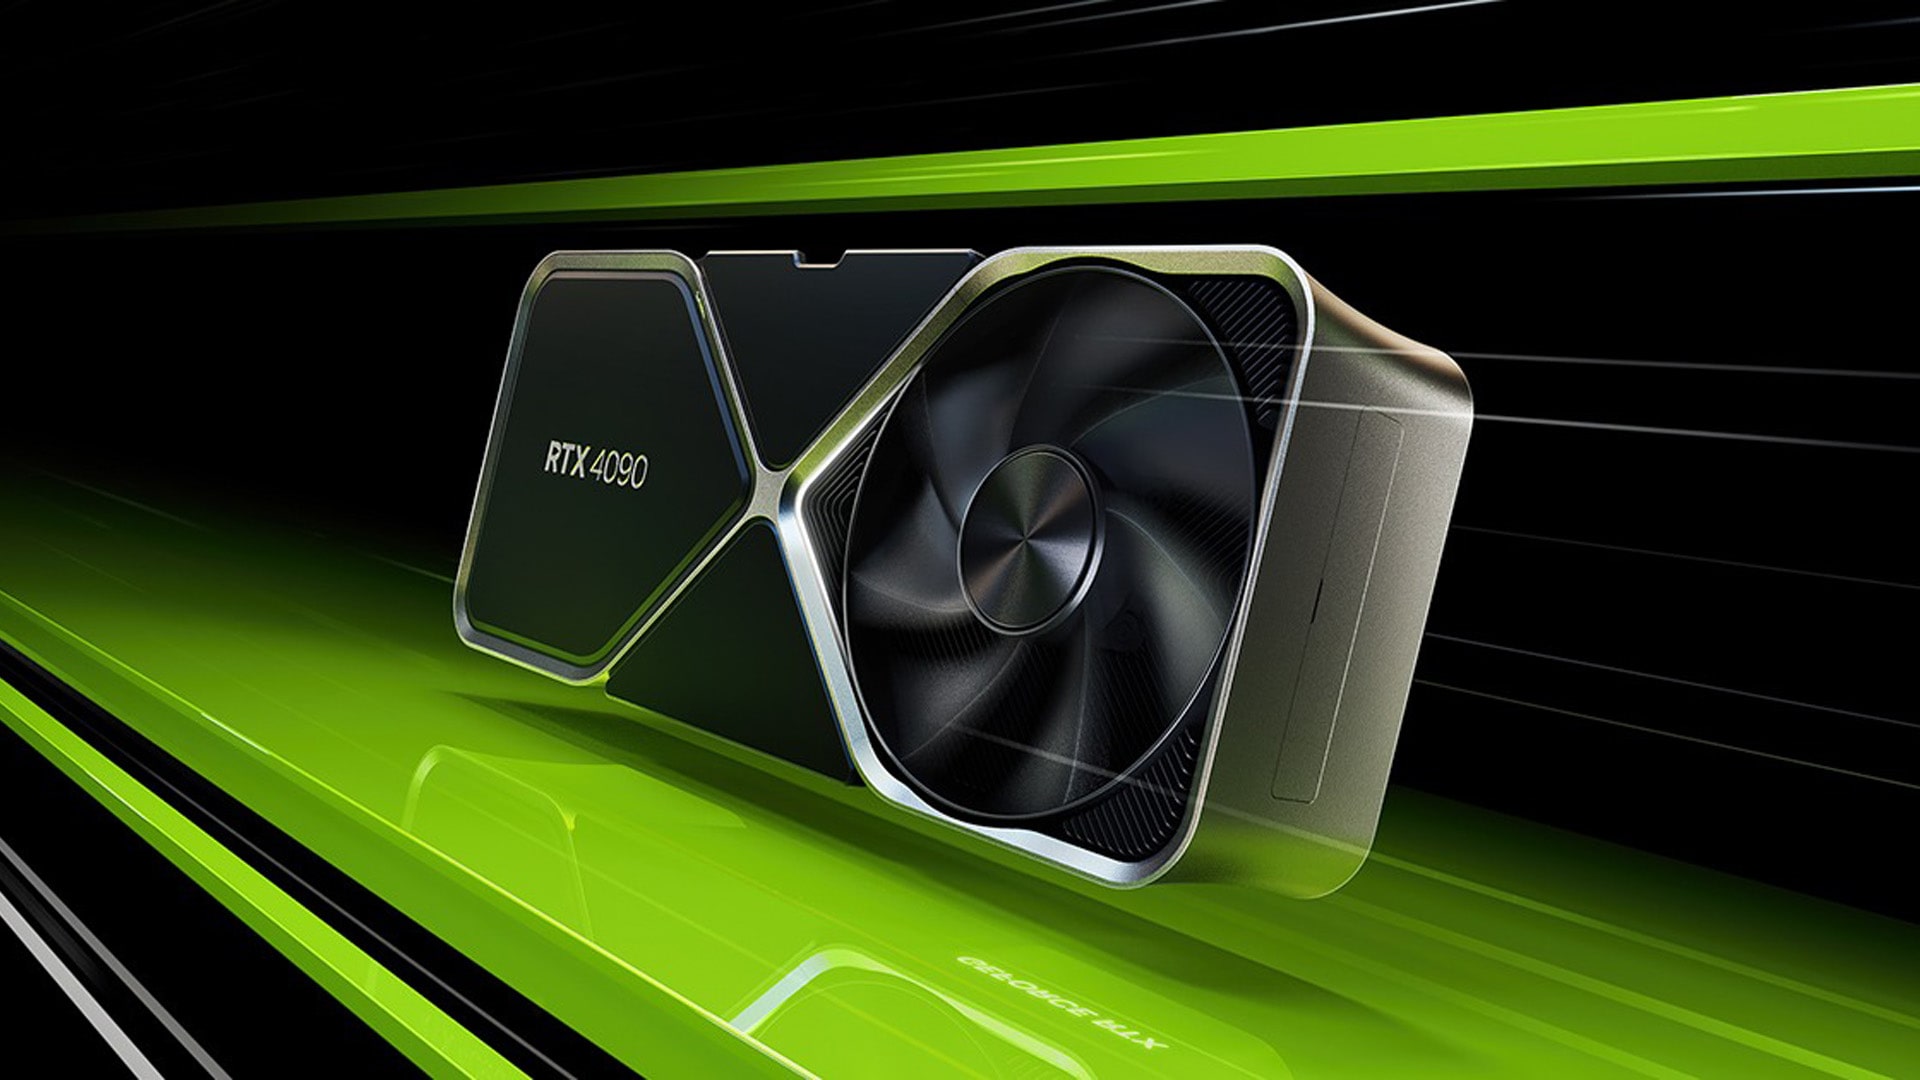 NVIDIA GeForce RTX graphics card can boost PC gaming